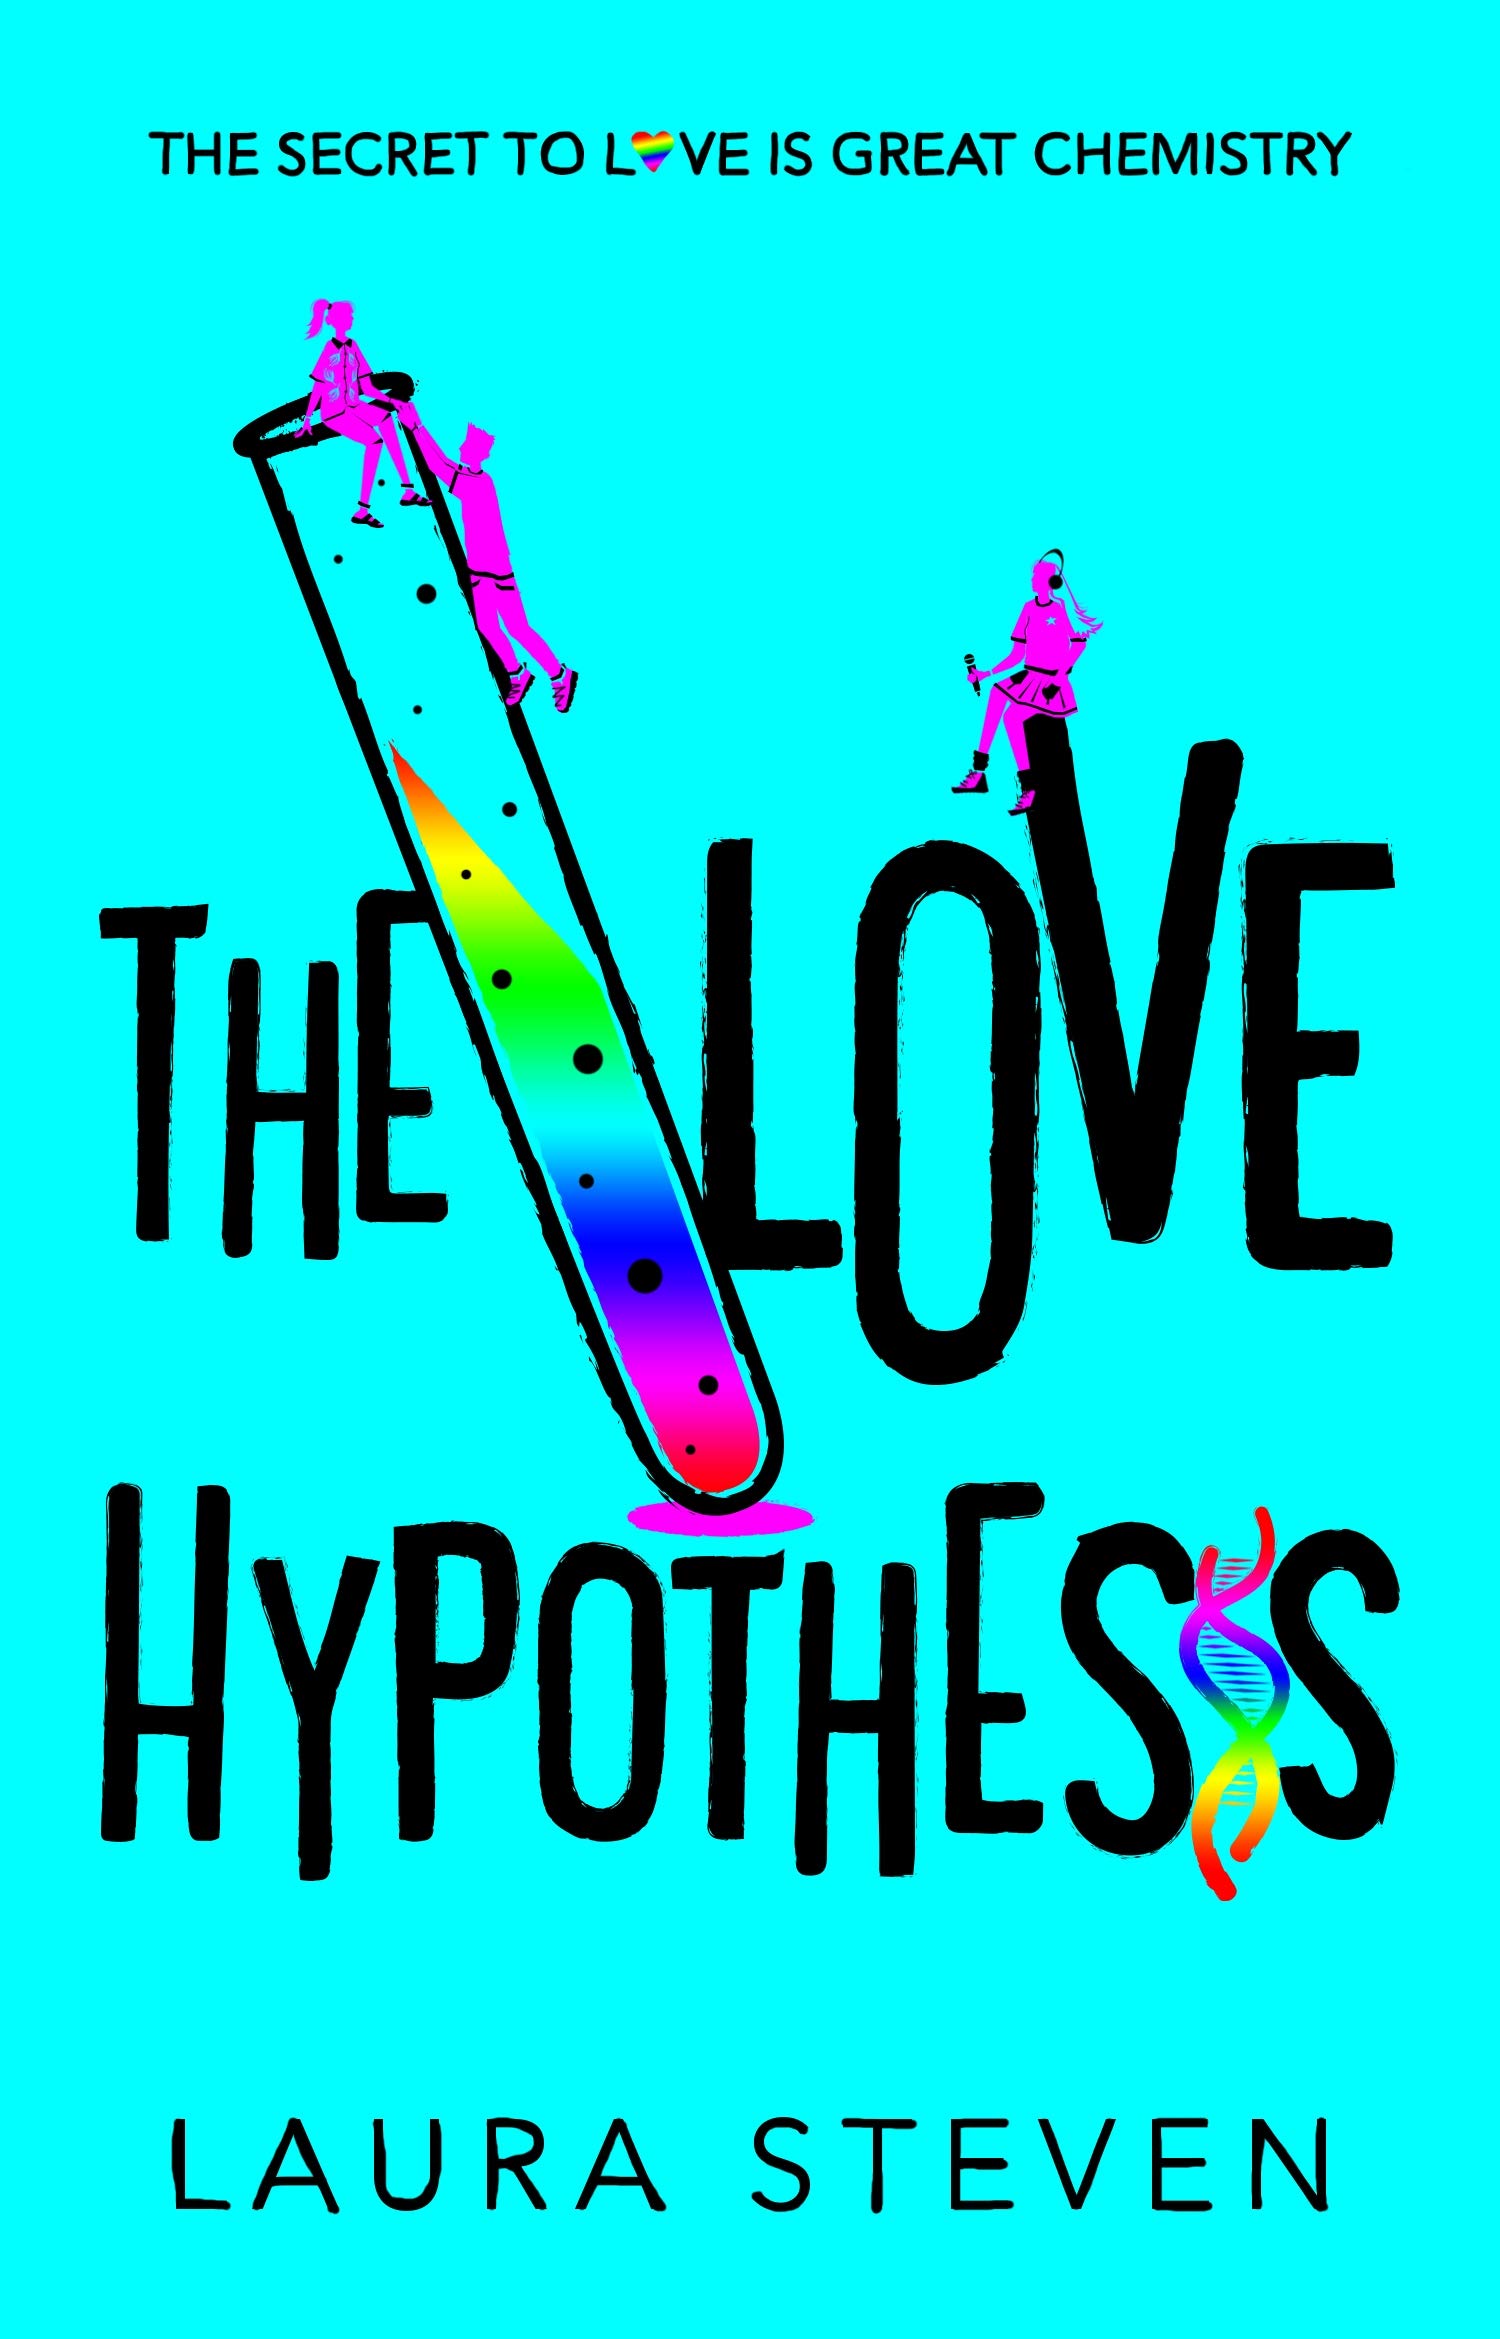 love hypothesis book spicy chapters